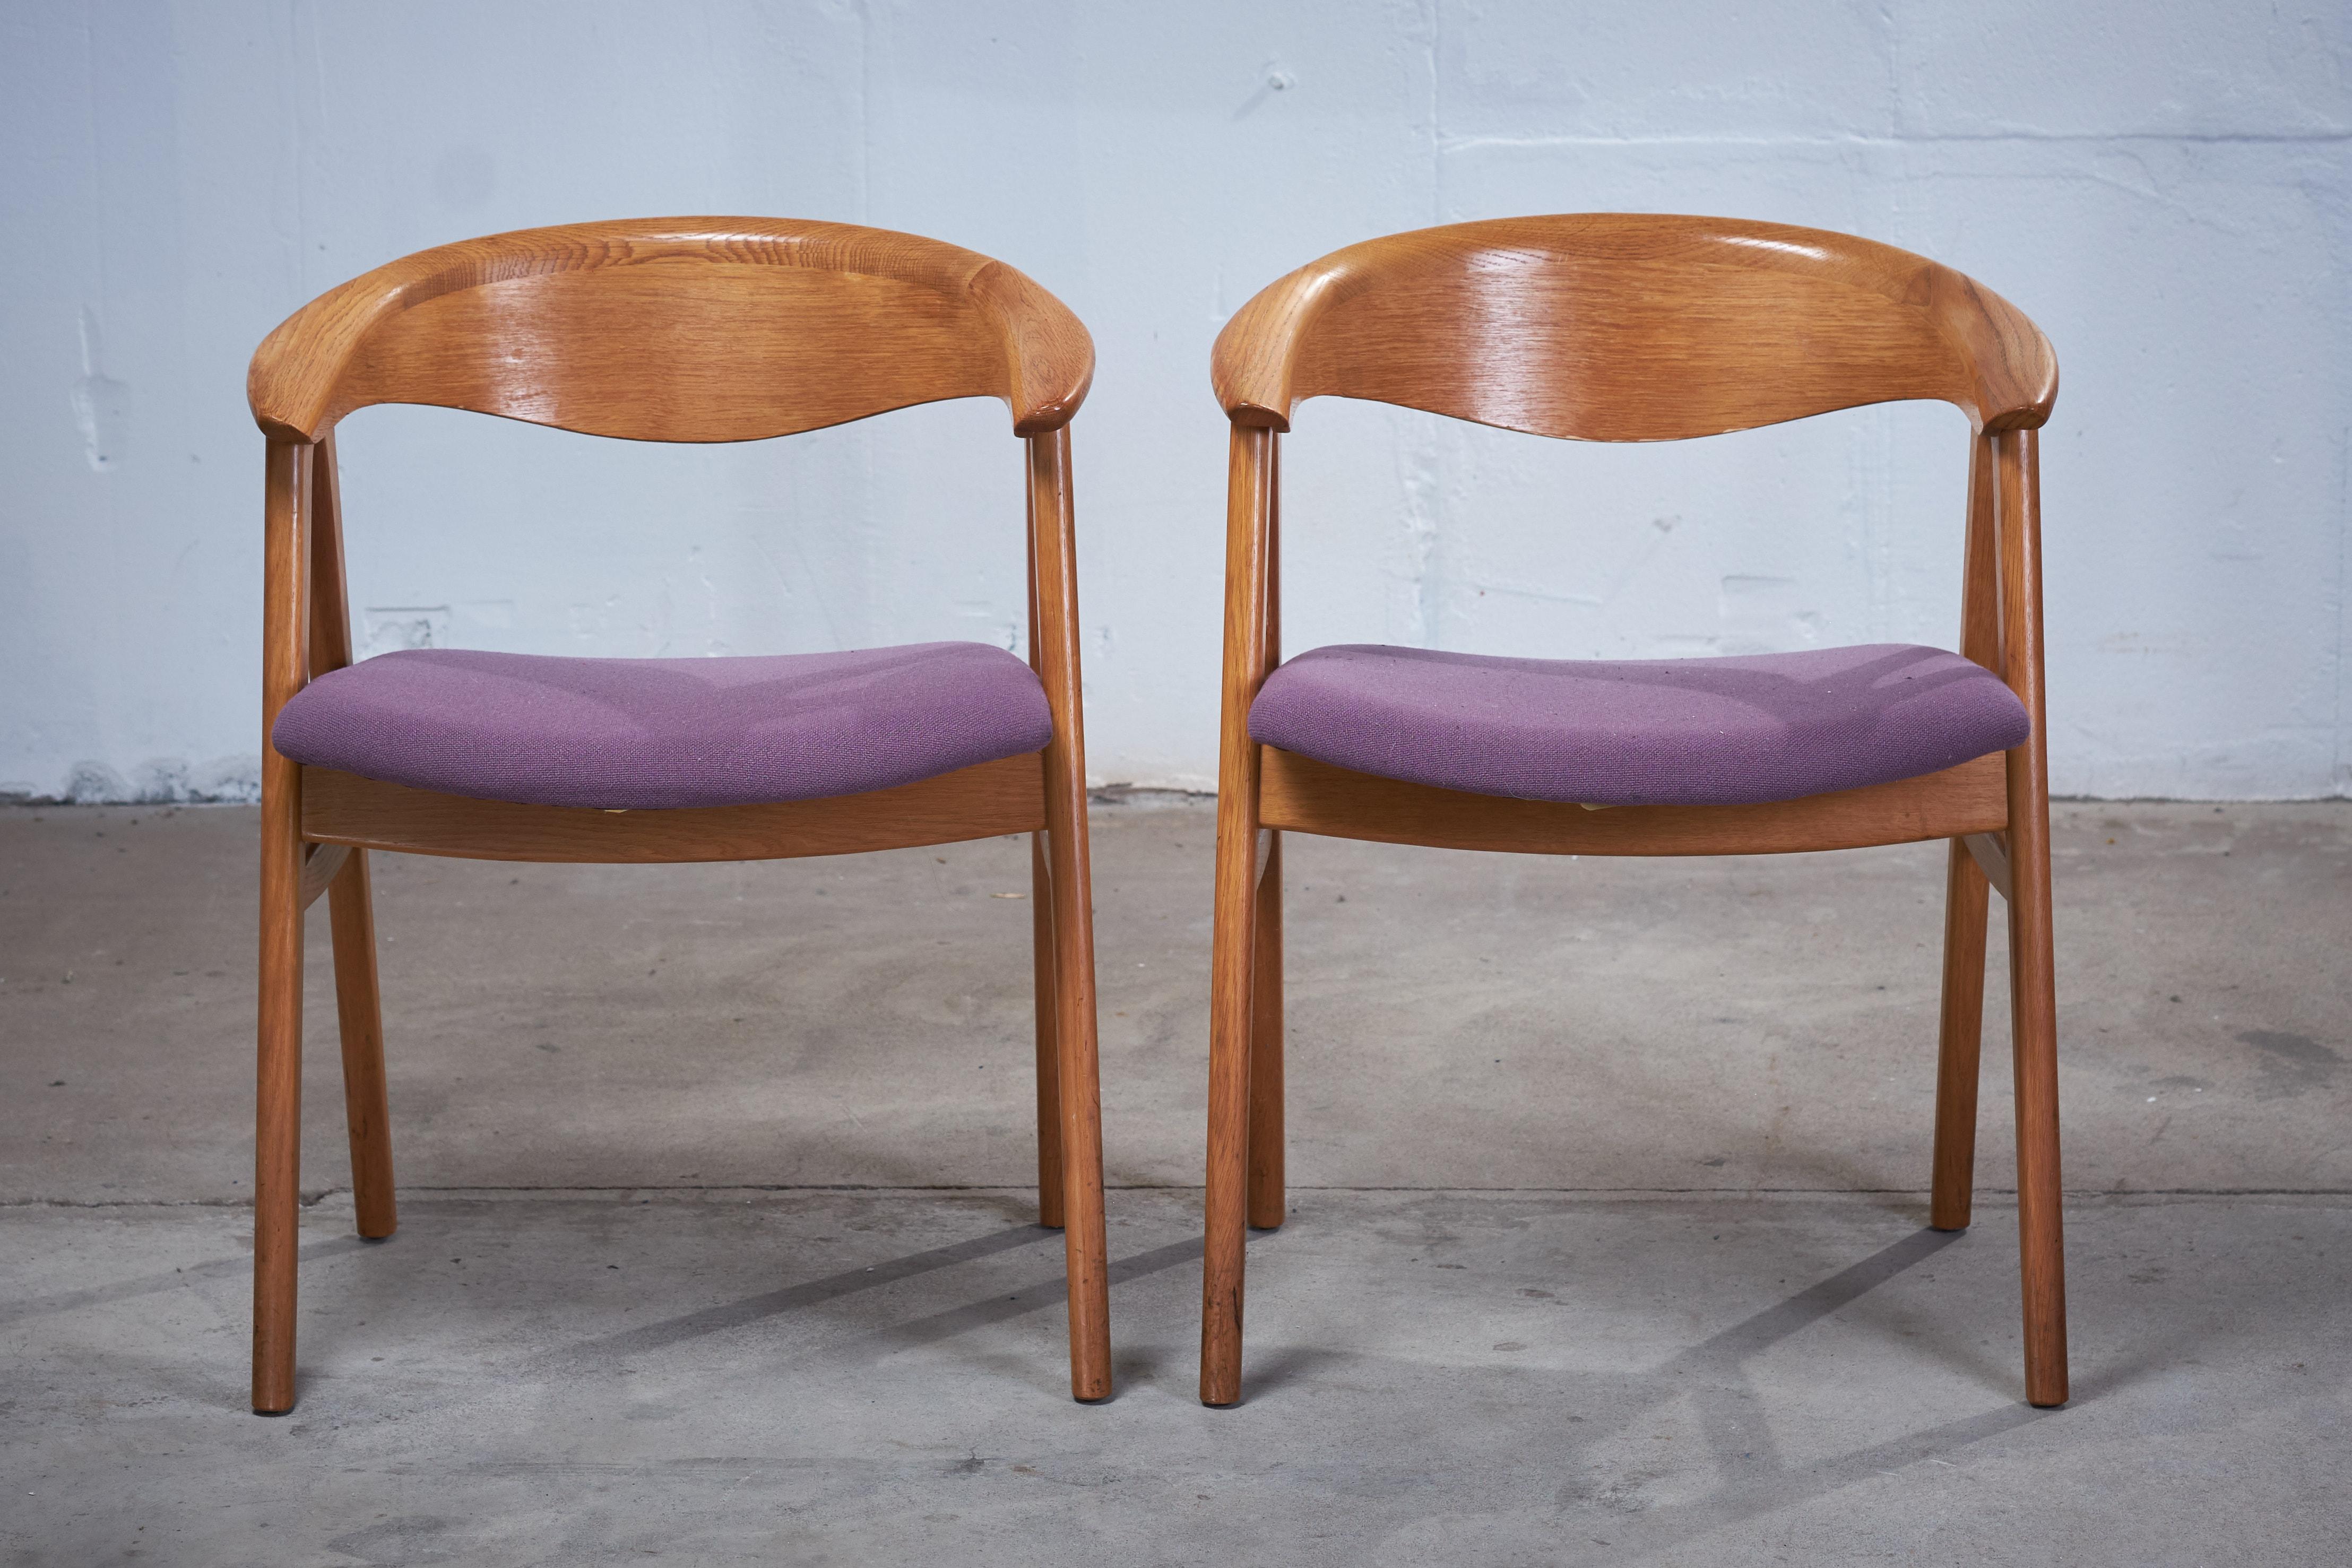 This pair of Erik Kirkegaard armchairs in oak was designed in 1952, 'Model 52' for Høng Stolefabrik. The chairs has a generous, curved backrest with a wide lip and a seat with good quality wool, supported between two A-frame legs of solid oak. The